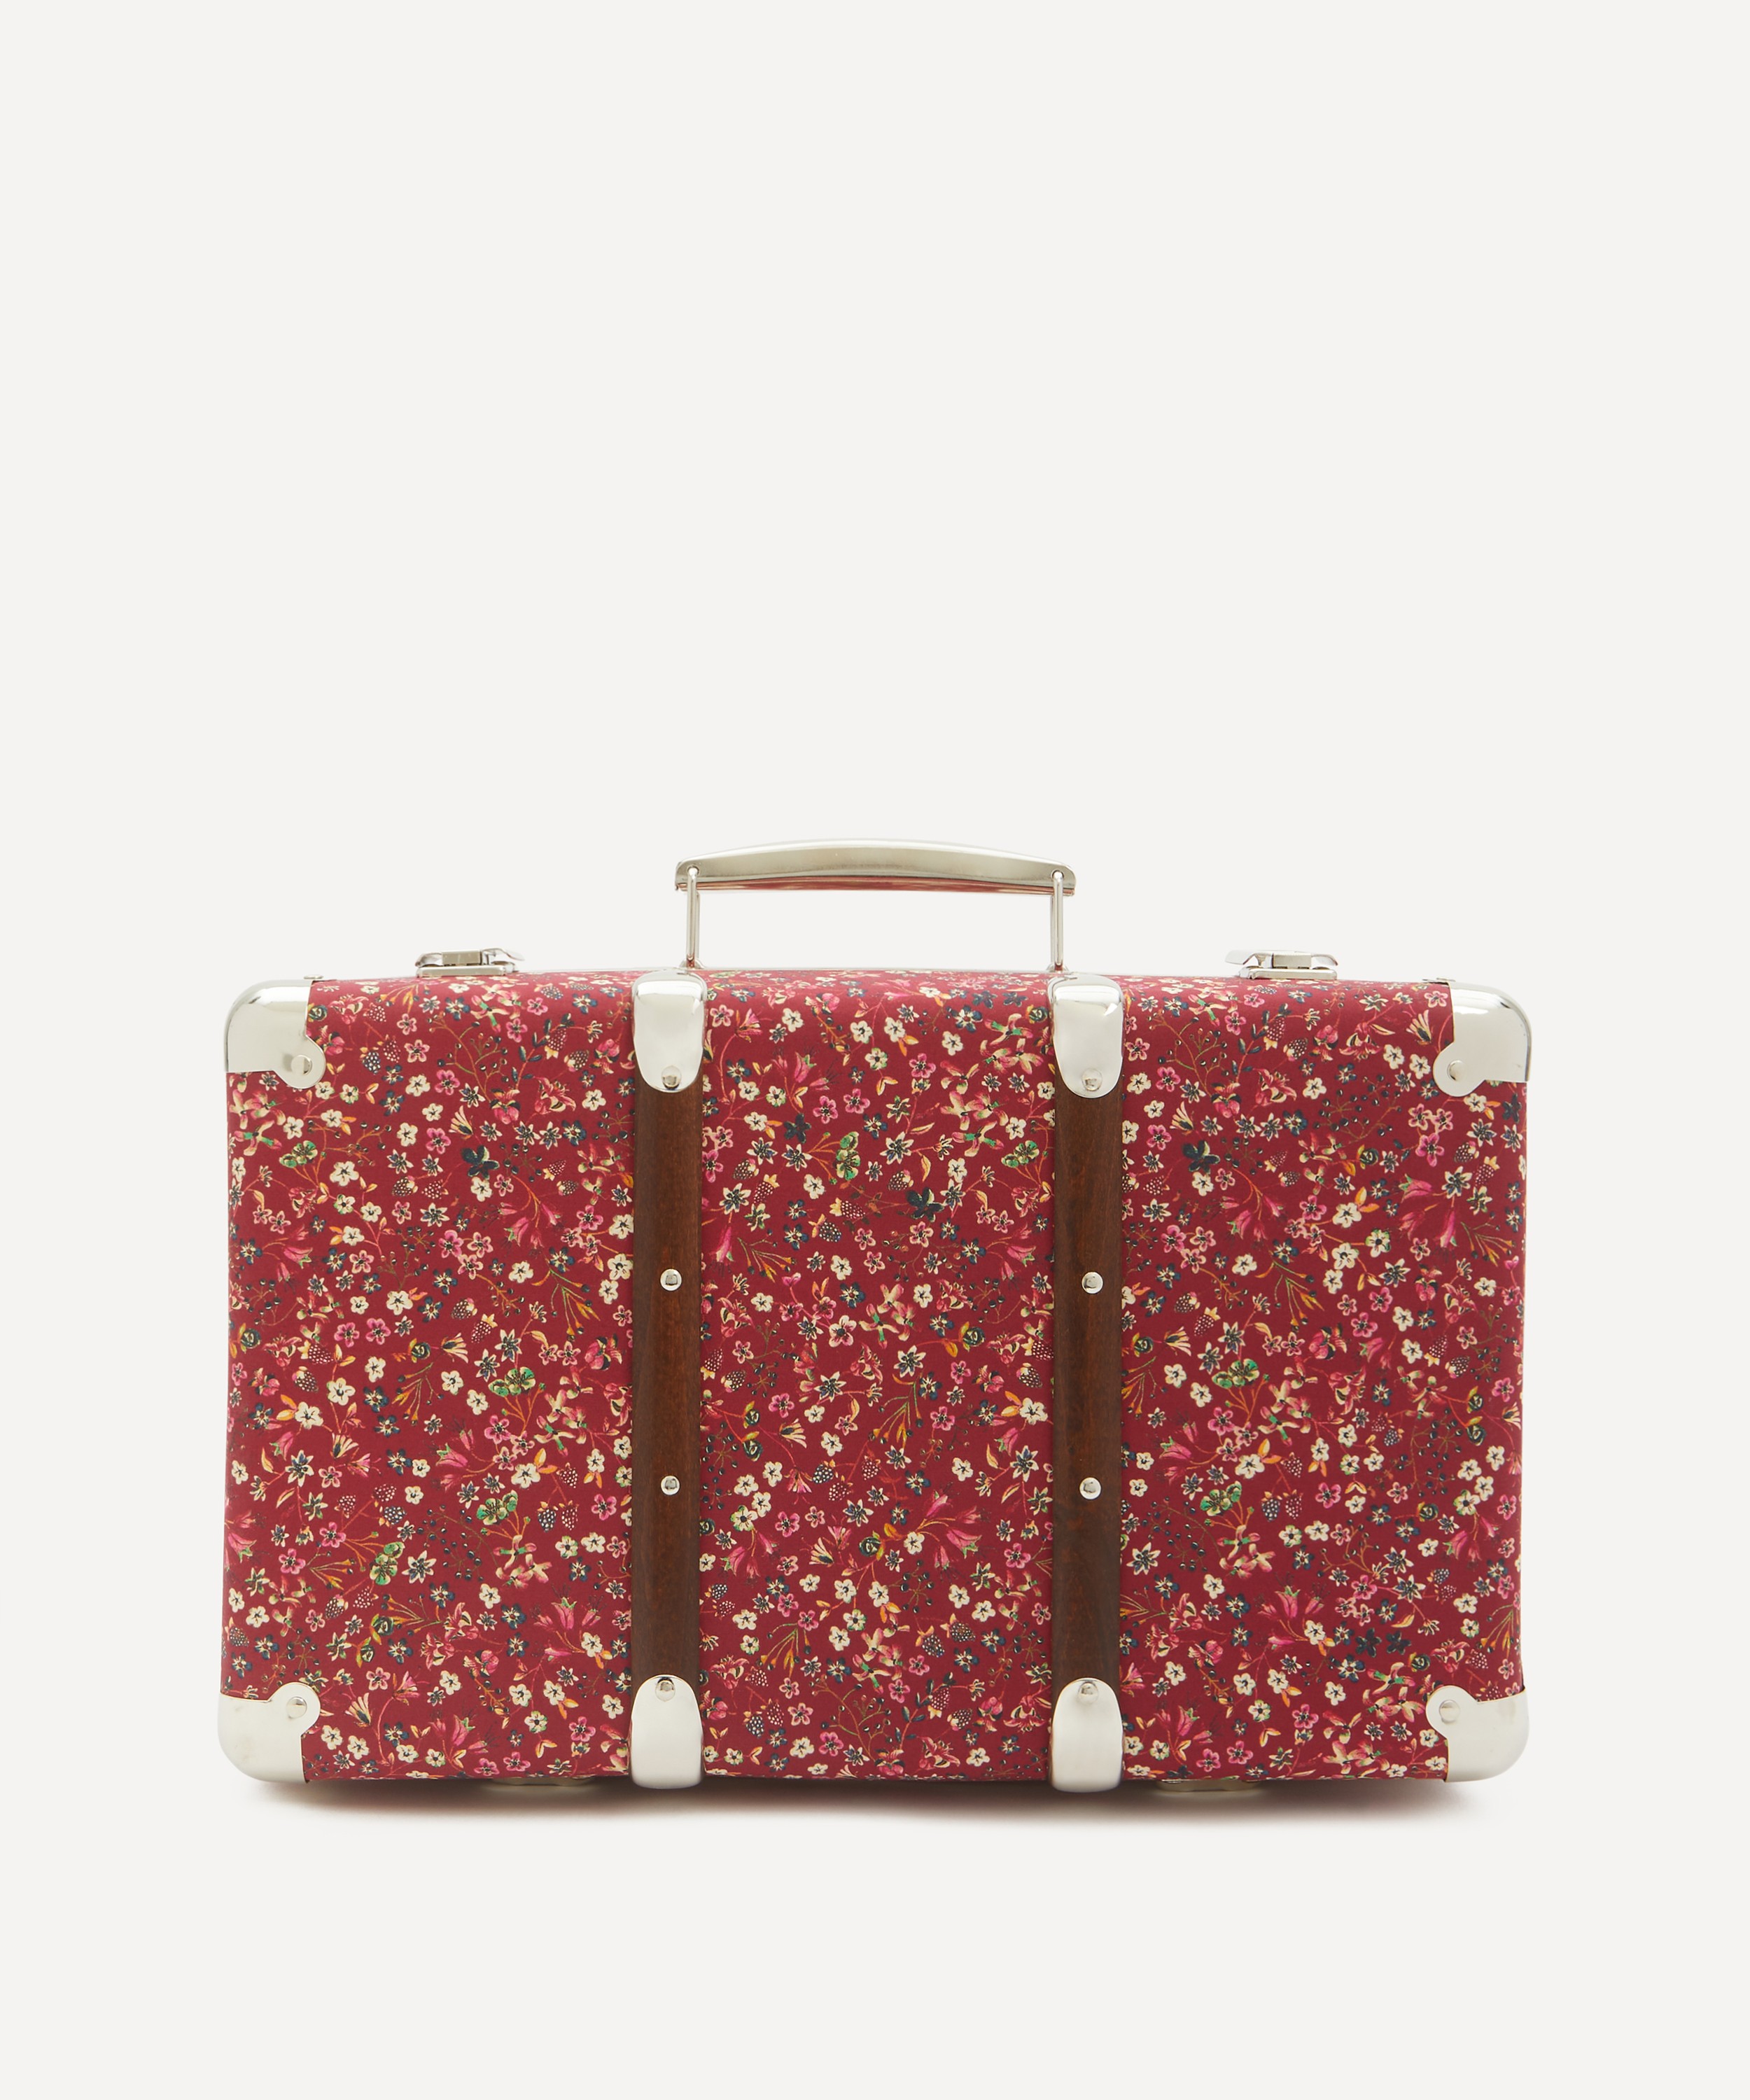 Liberty - Donna Leigh Tana Lawn™ Cotton Wrapped Suitcase